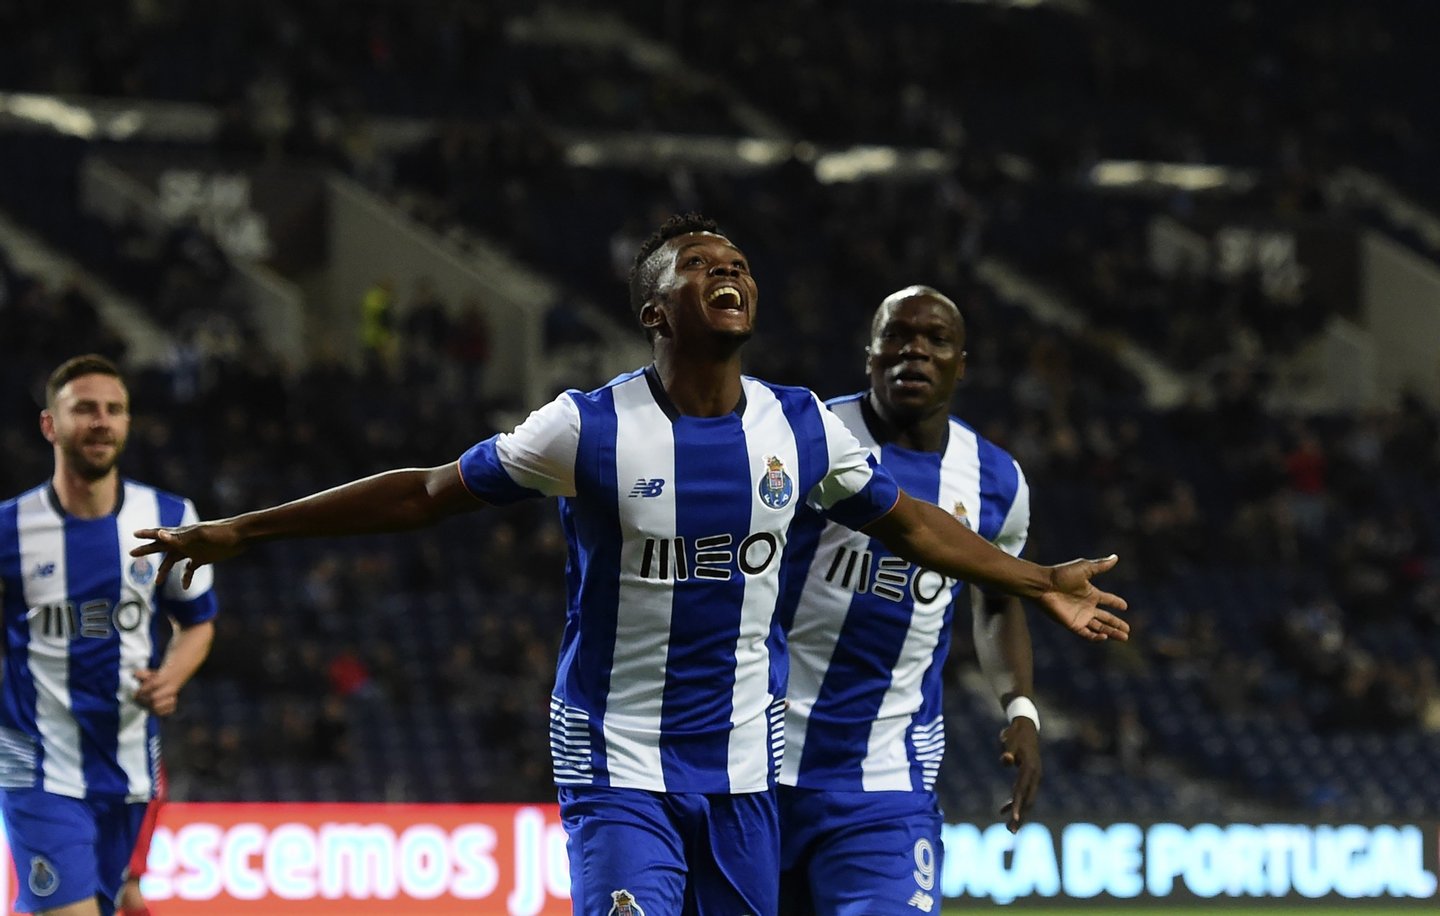 Porto's Nigerian defender Chidozie Awaziem (C) celebrates a goal during the second-leg semi-final Portugal Cup FC Porto vs Gil Vicente football match at the Dragao stadium in Porto on March 02, 2016. / AFP / FRANCISCO LEONG (Photo credit should read FRANCISCO LEONG/AFP/Getty Images)